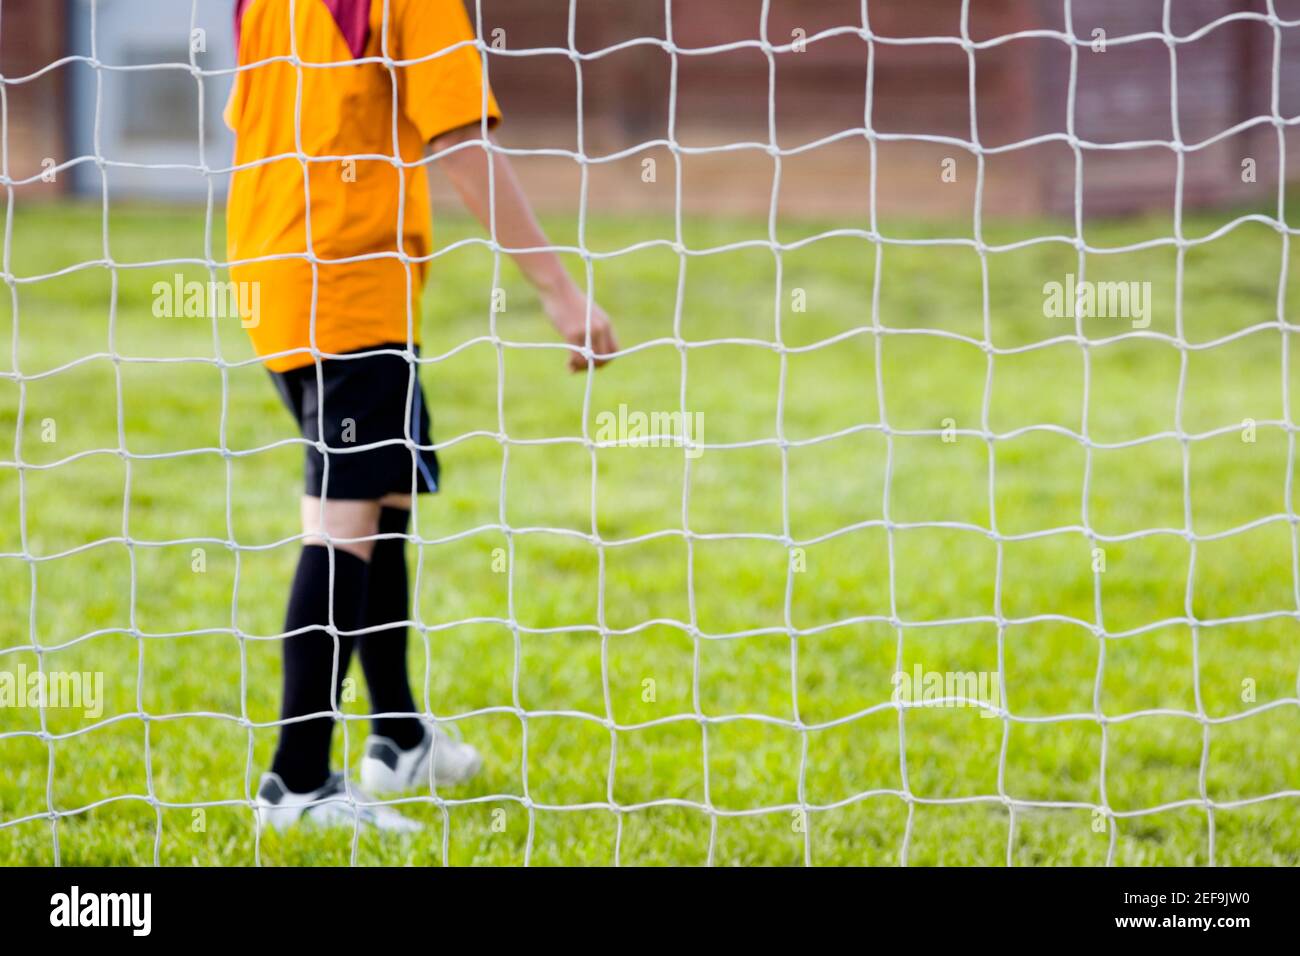 Side profile of a soccer player standing behind a net Stock Photo